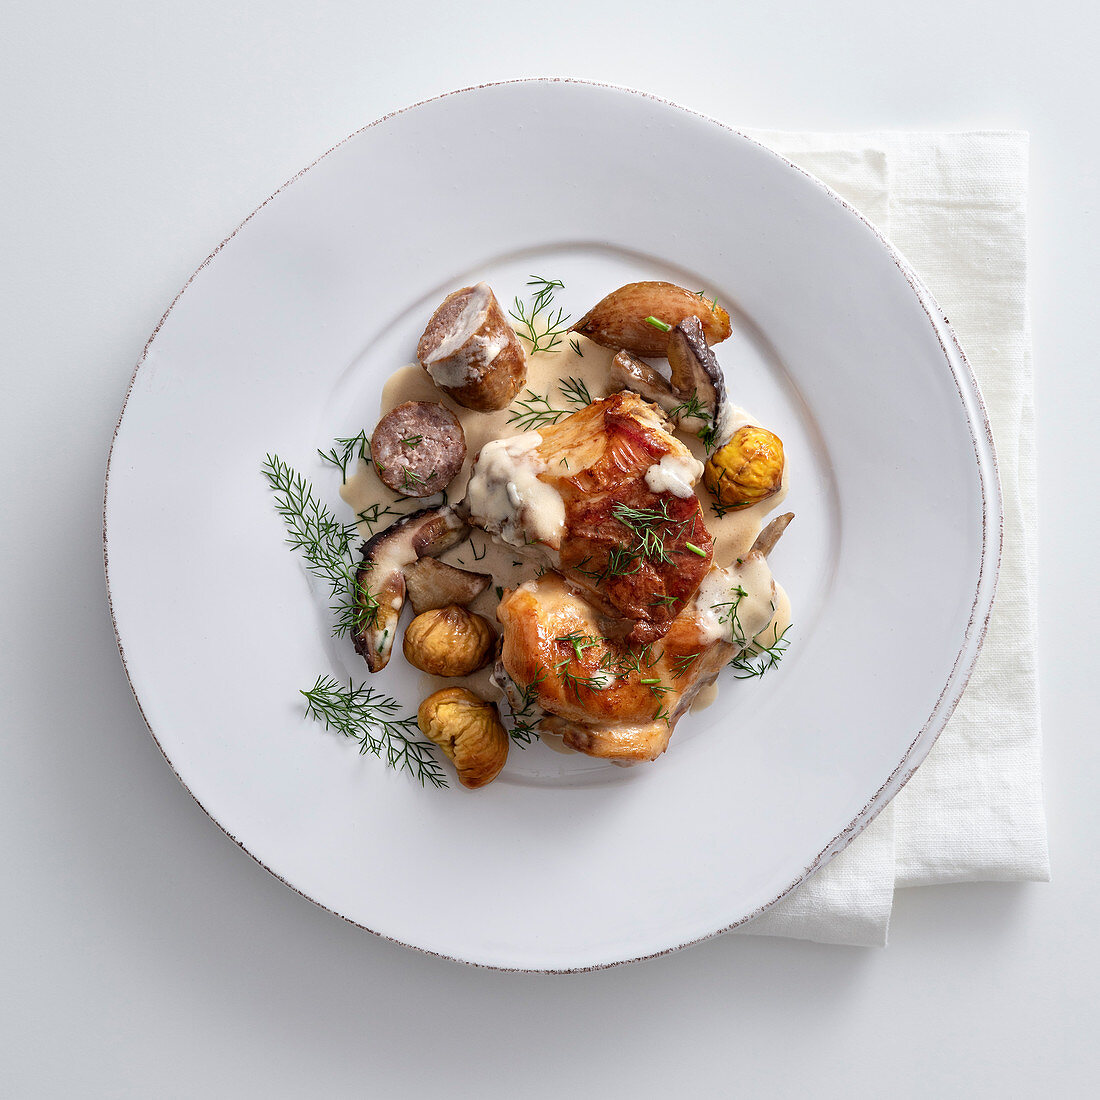 Rabbit with salsiccia, chestnuts and porcini mushrooms